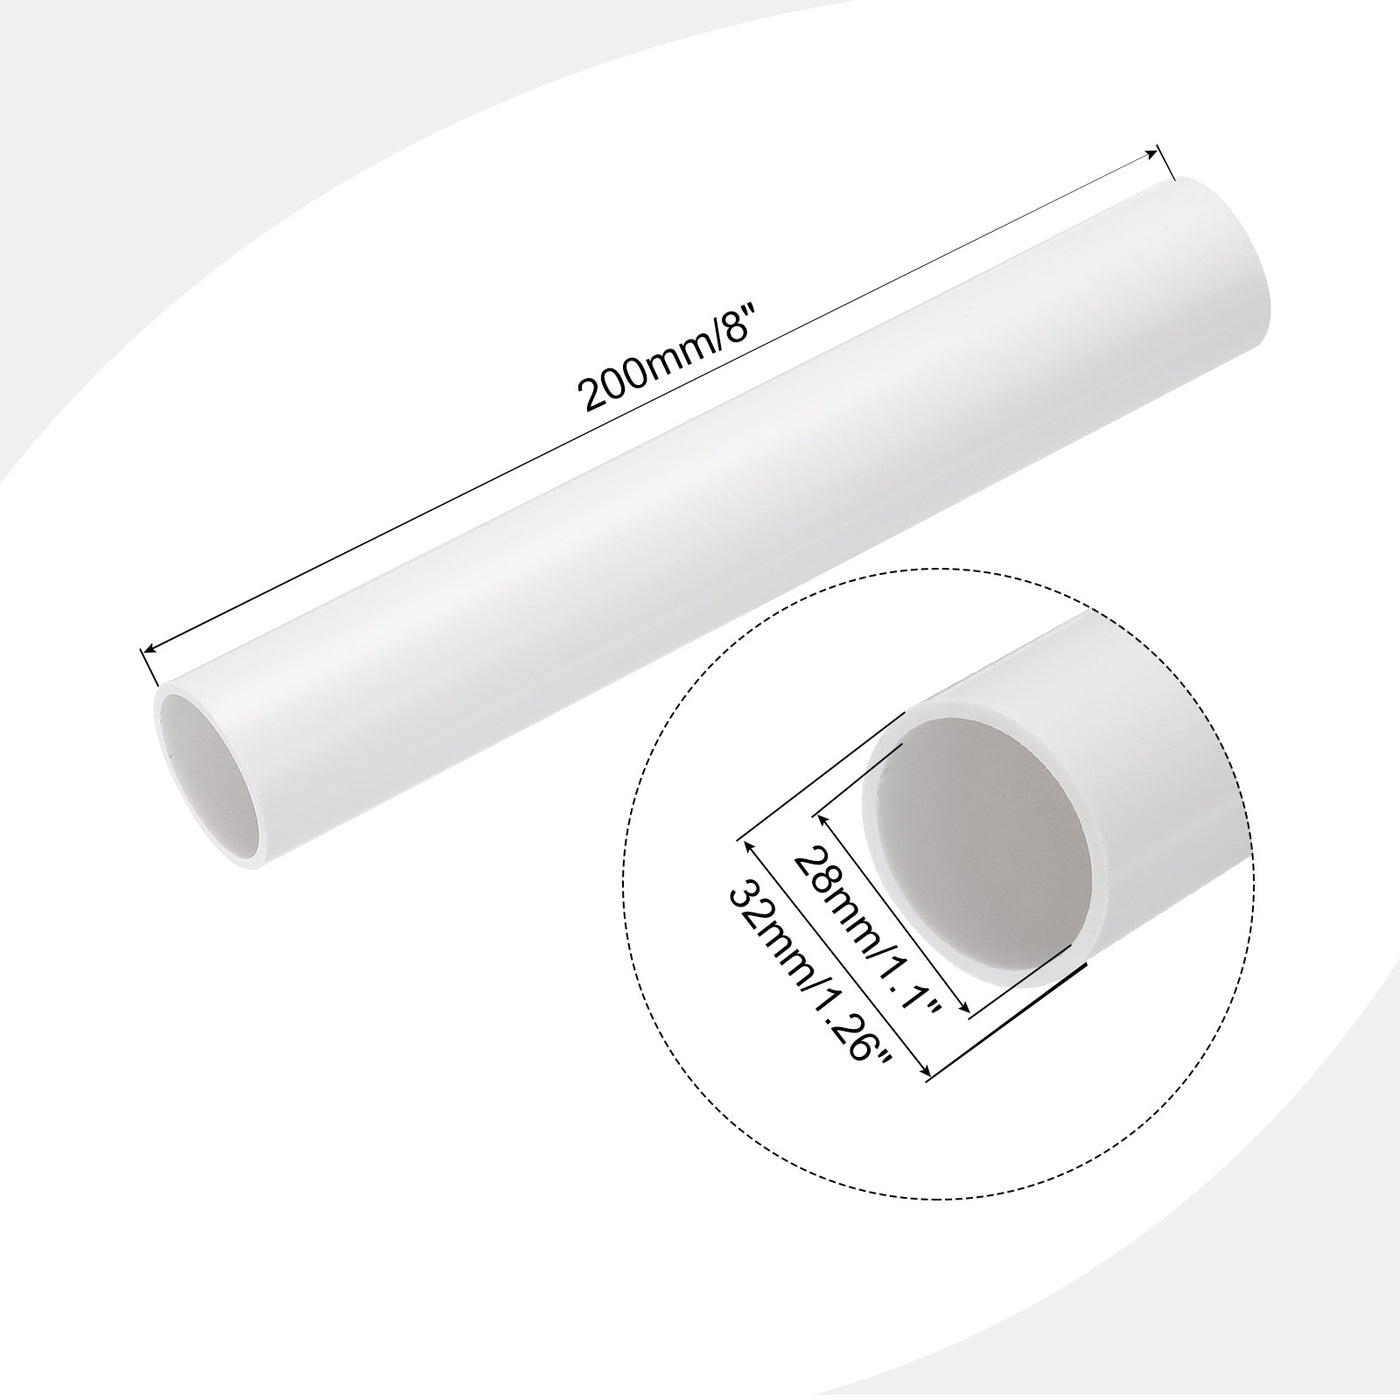 Harfington PVC Rigid Round Pipe 28mm ID 32mm OD 20cm/8" Length White High Impact for Water Pipe, Crafts, Cable Sleeve